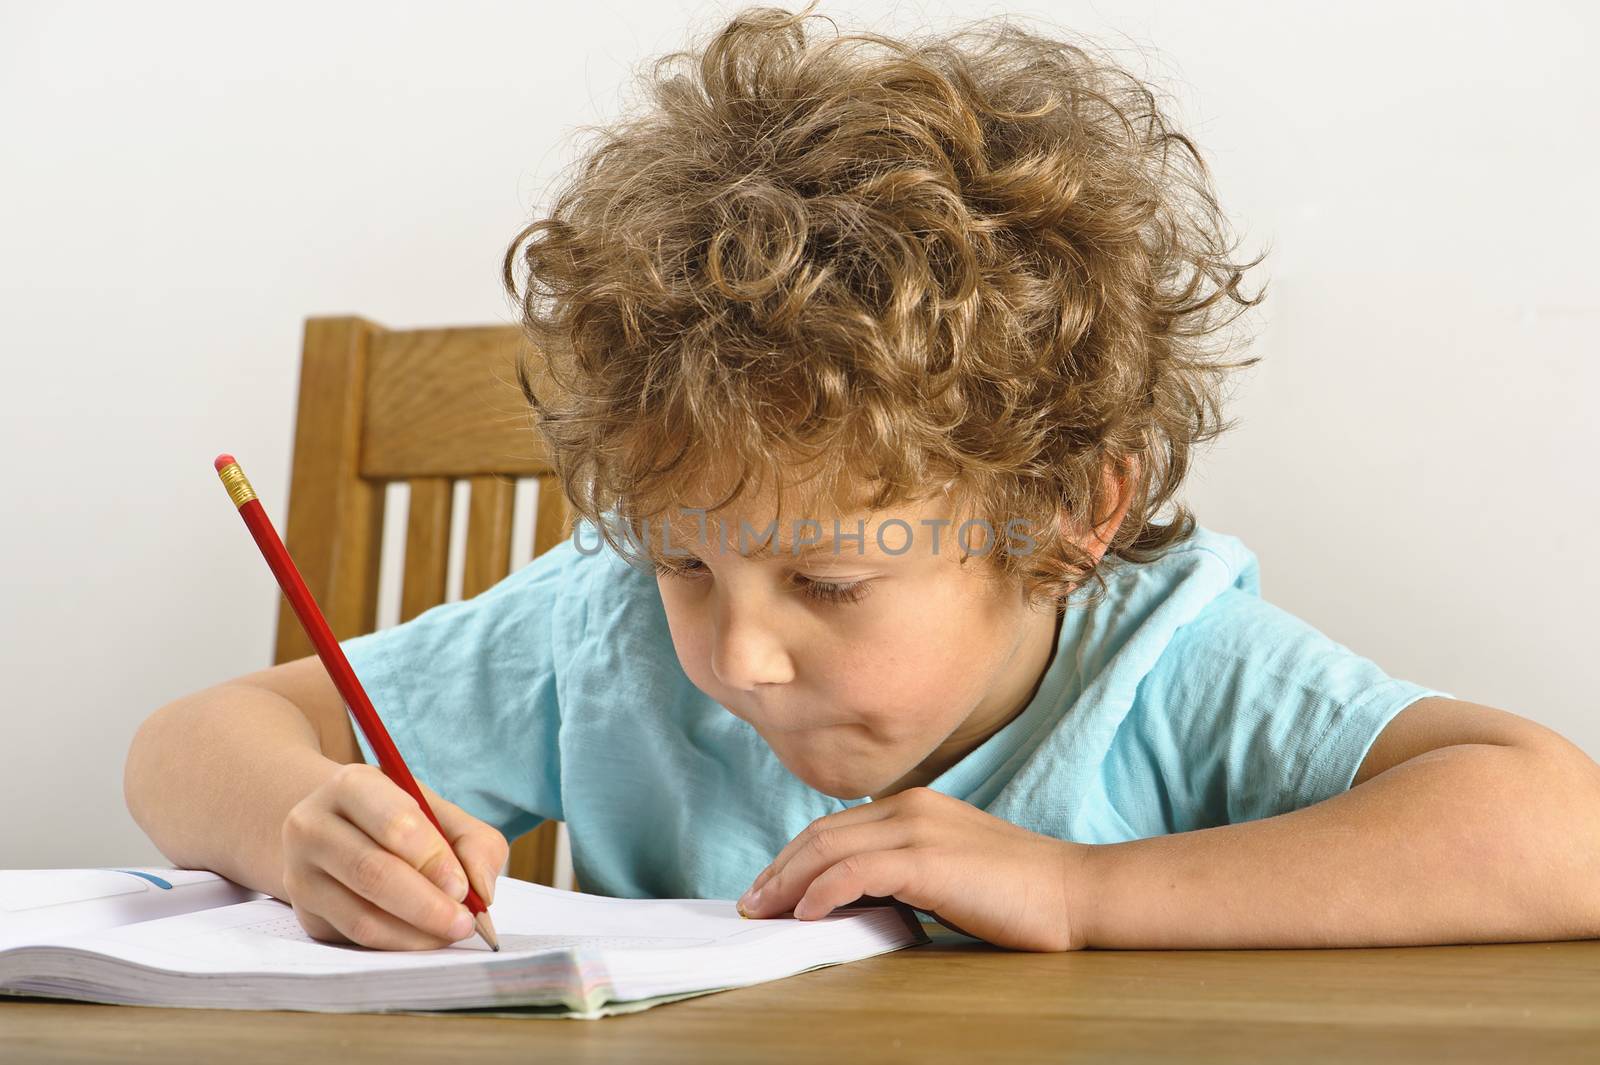 Curly haired young boy sits at a wooden table and does his homework